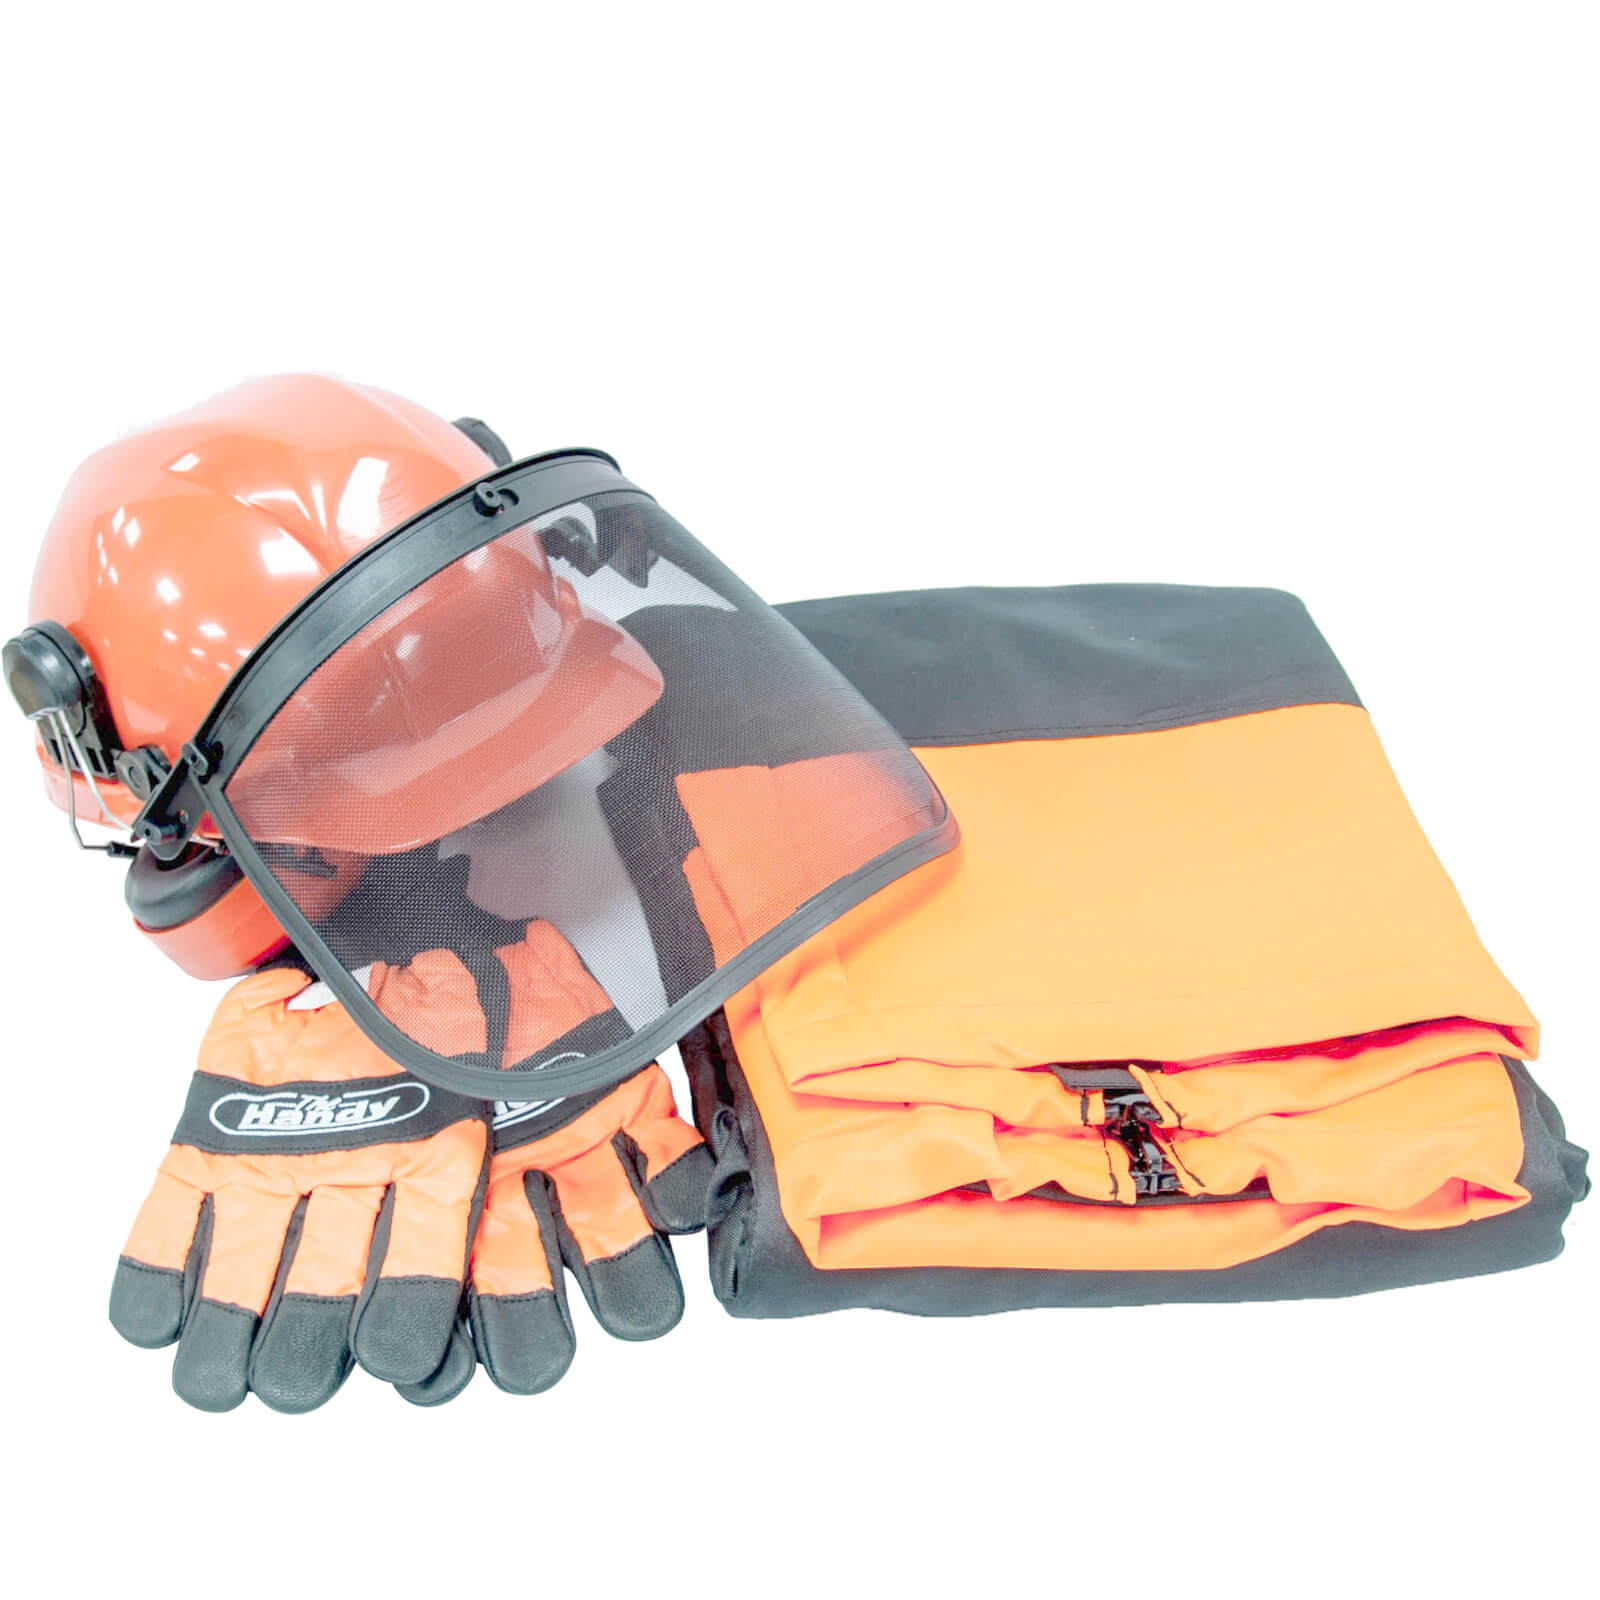 Handy Chain Saw Safety Helmet & Visor with Ear Muffs, Chaps & Gloves